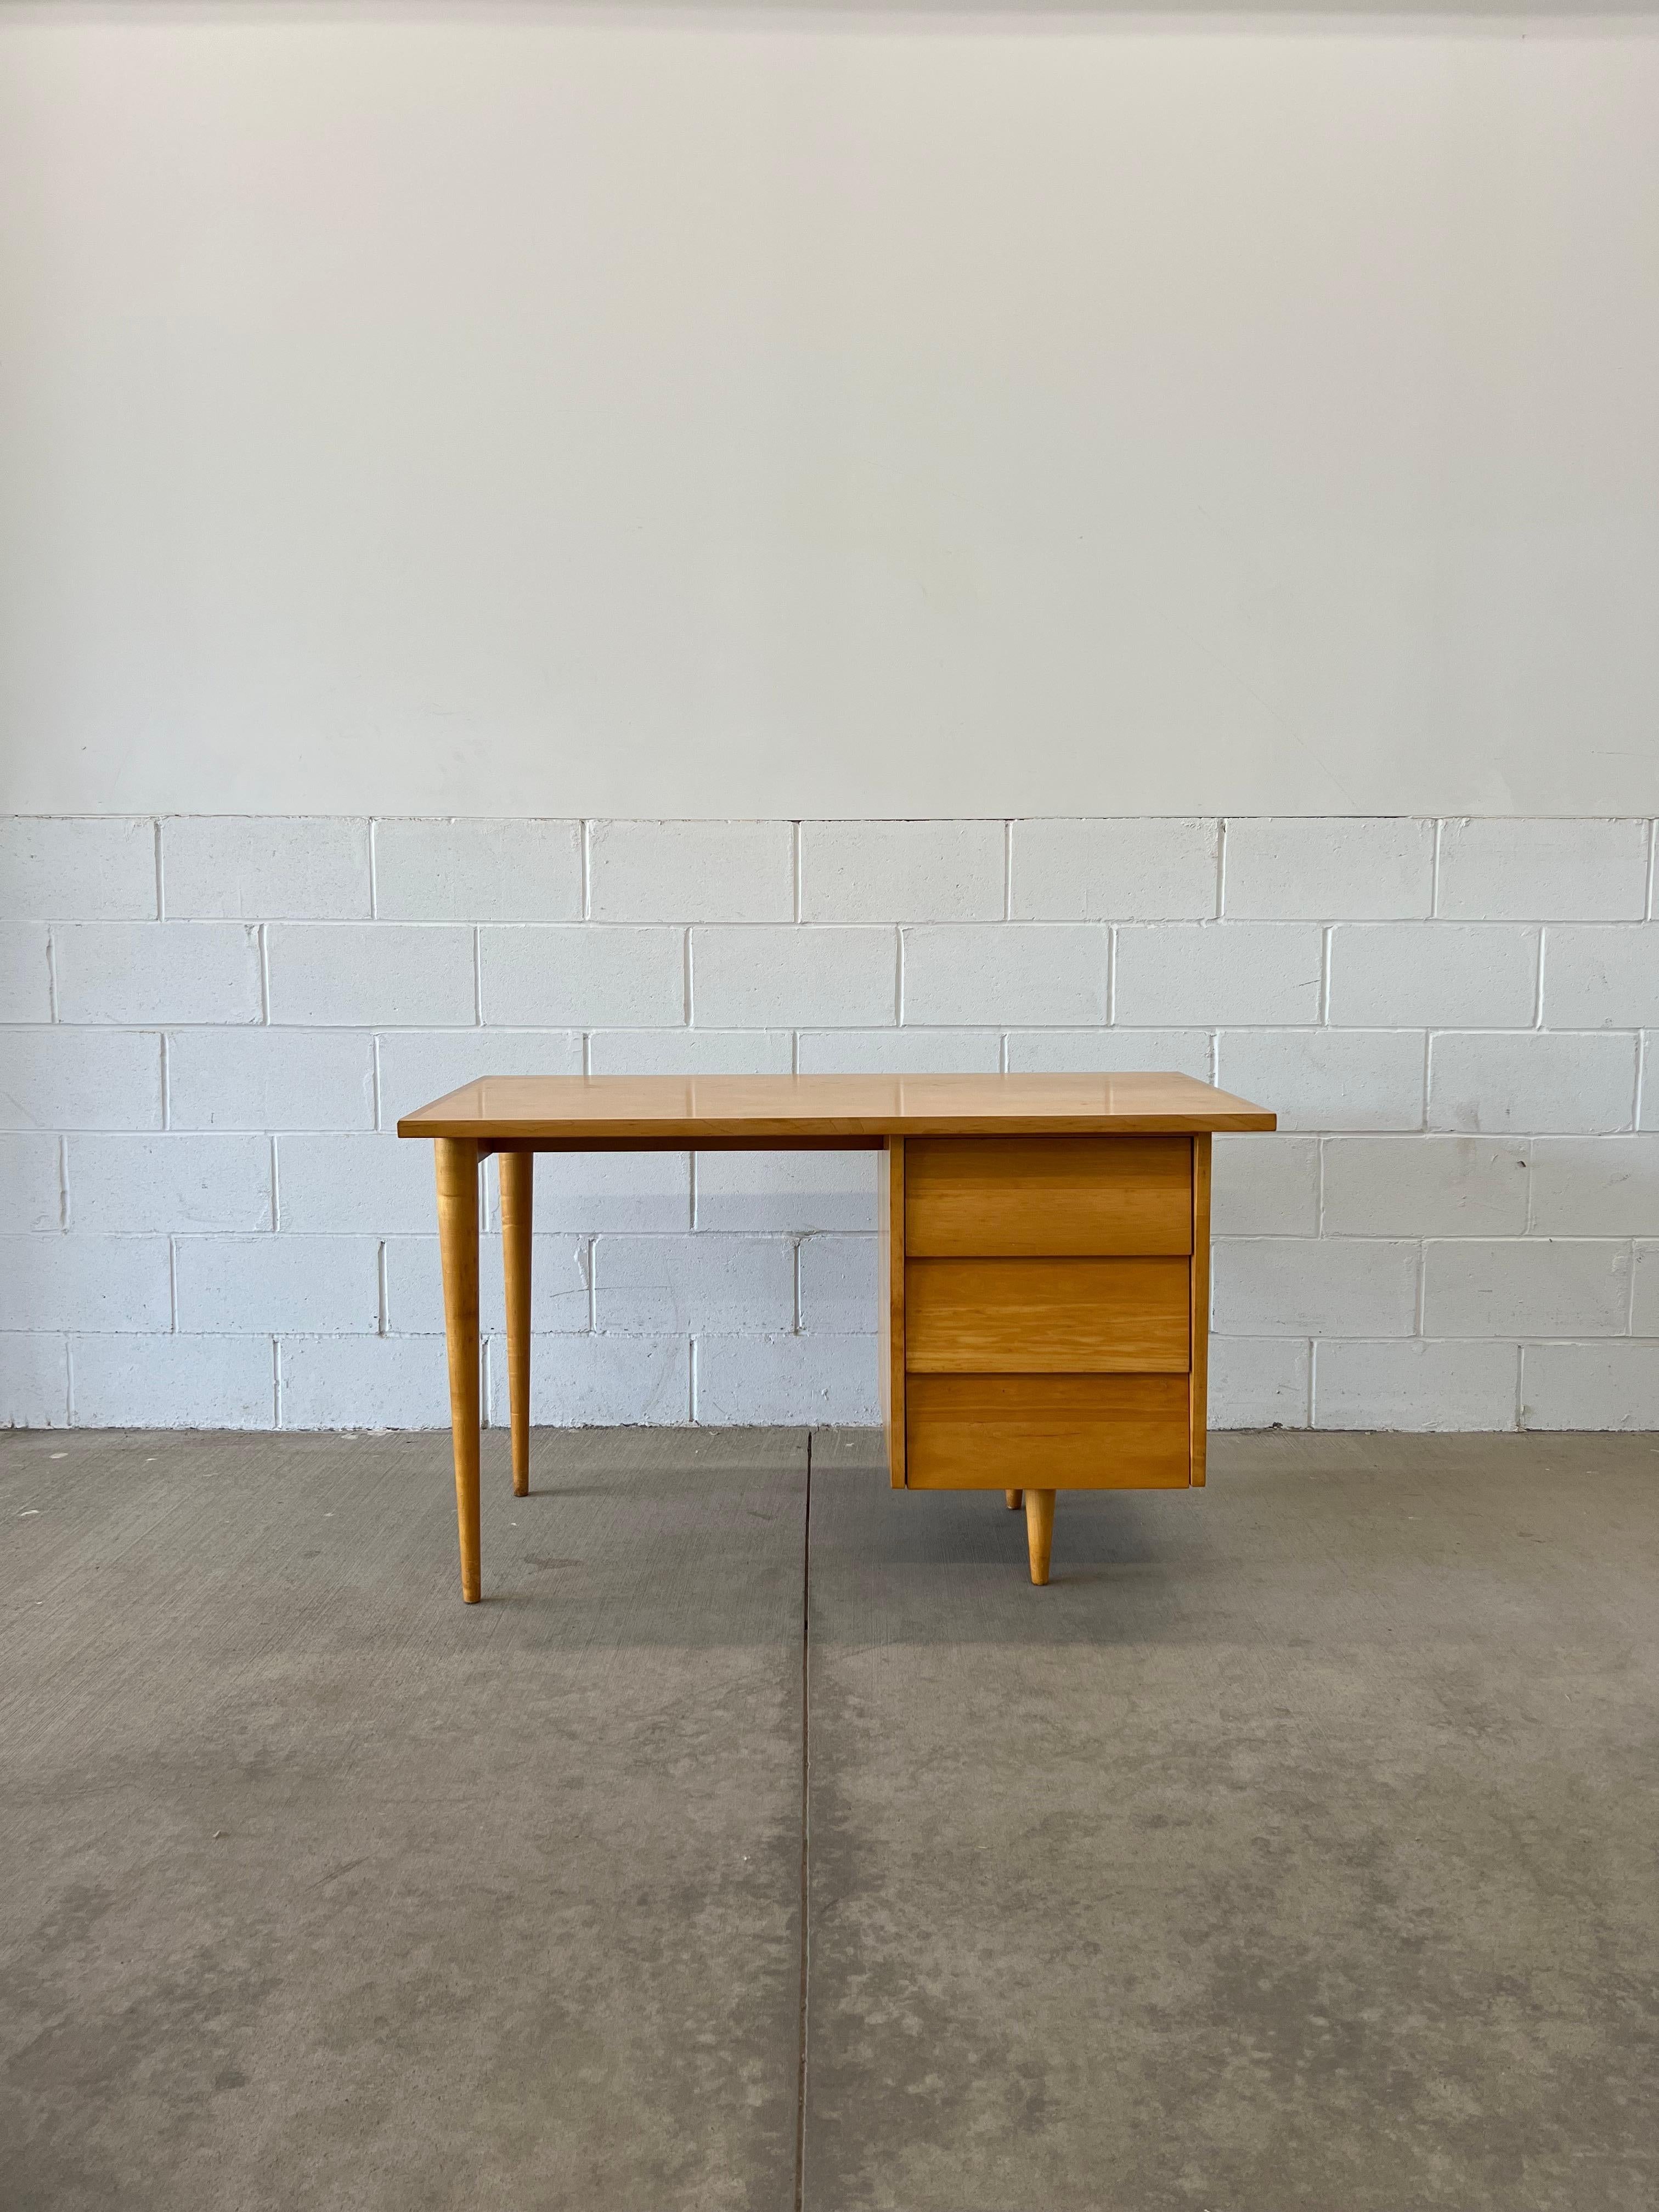 Alongside the model 75 stool, this desk was part of Florence Knoll's first collection of designs. The louvre drawers follows the same design language used in a variety of casegoods such as dressers, nightstands, and various configurations of desks.